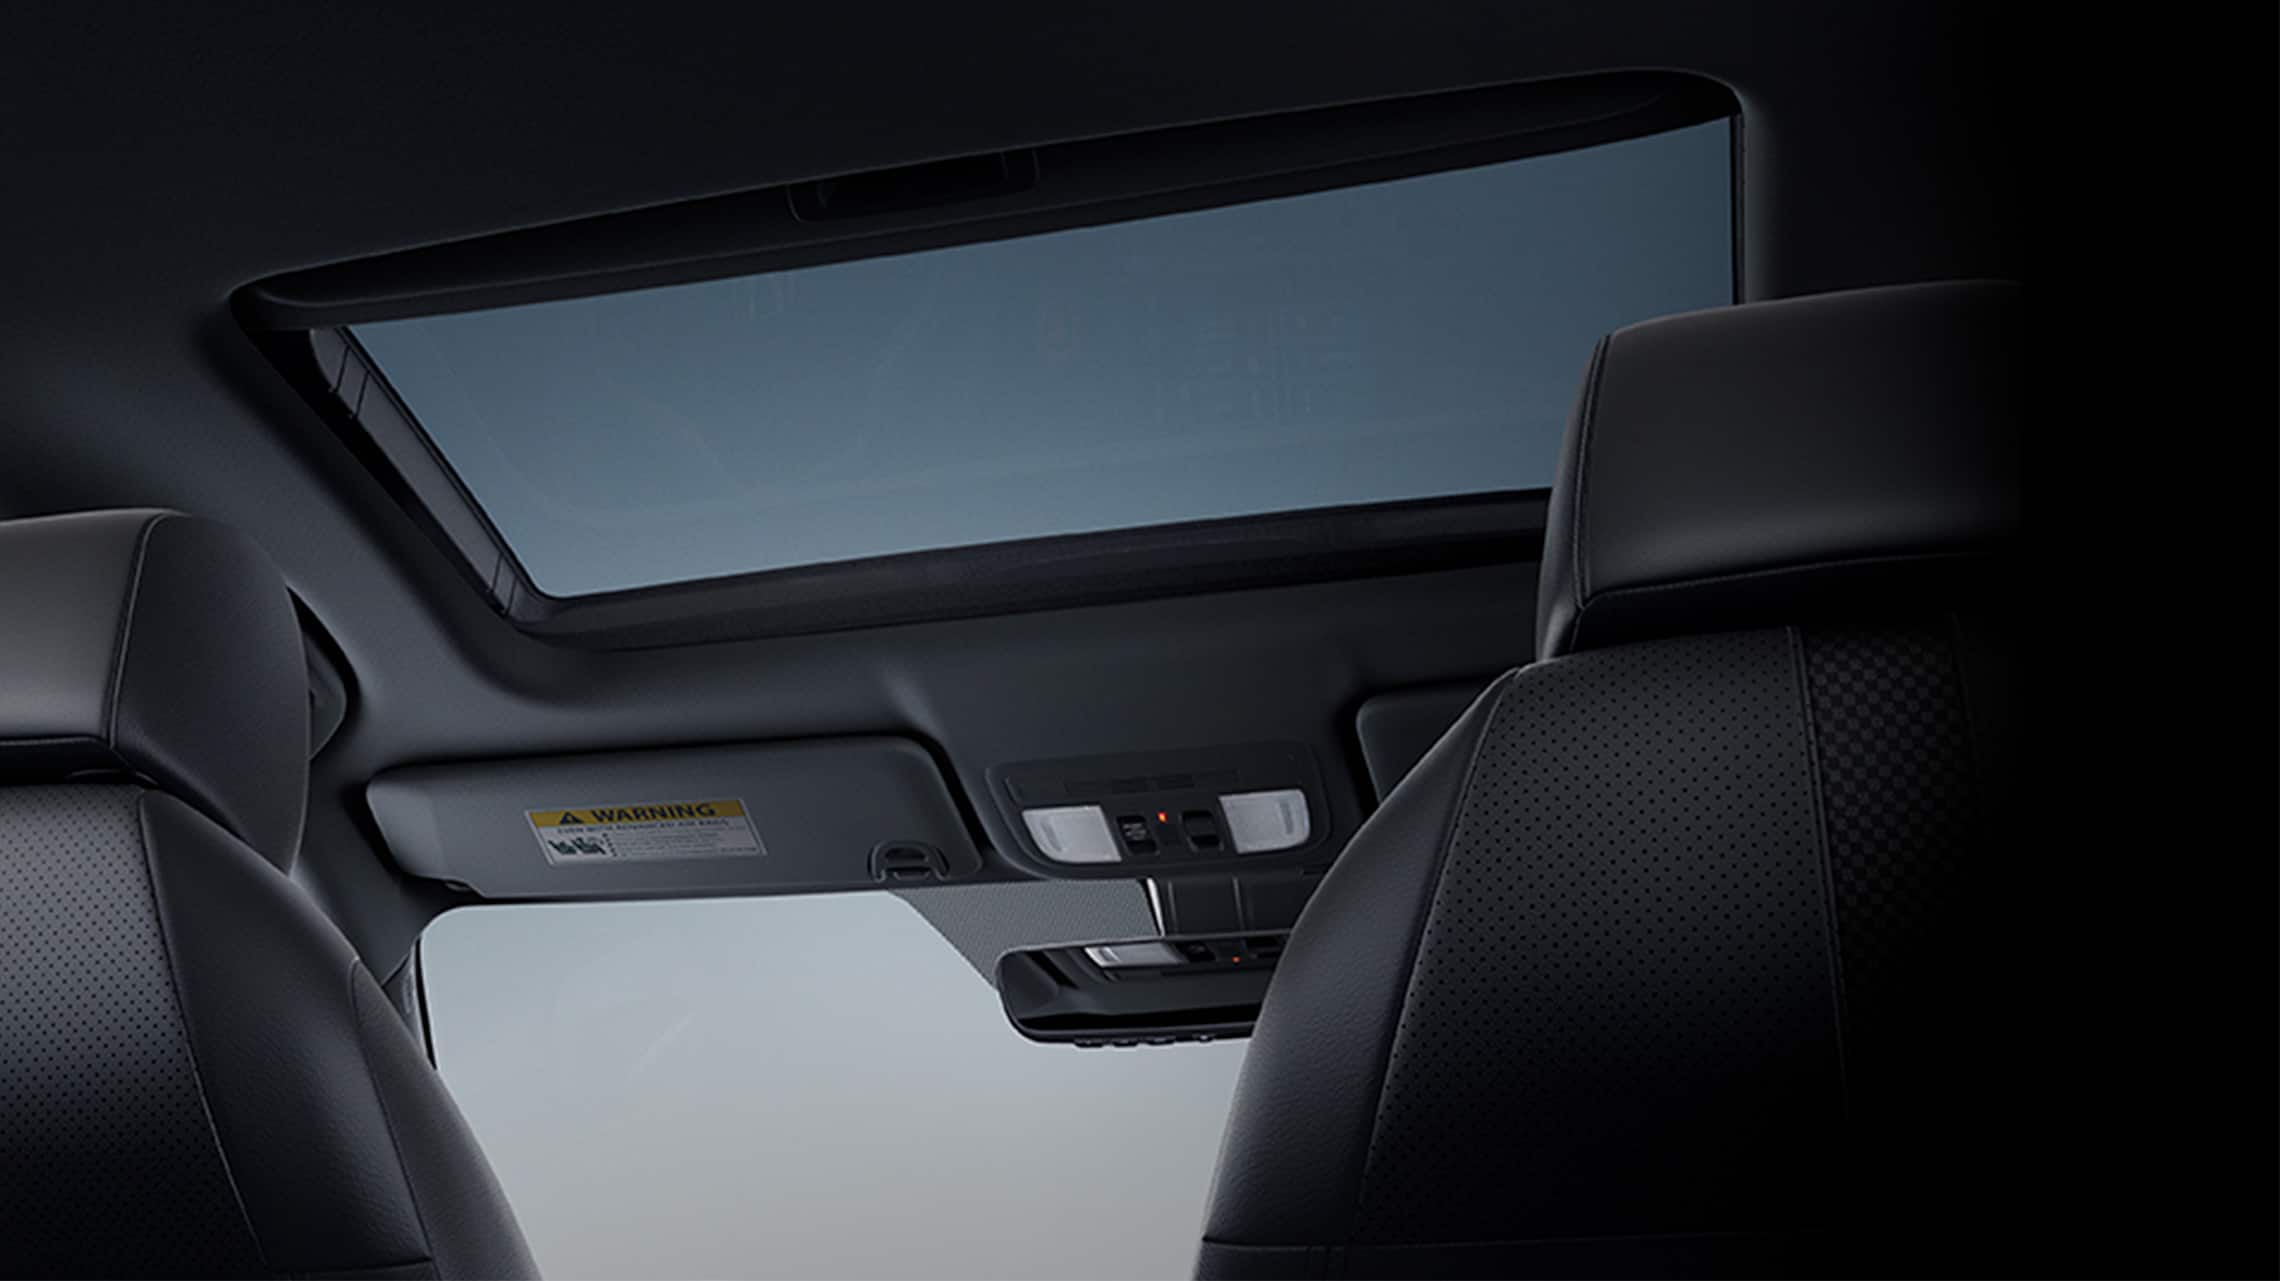 Power moonroof detail in the 2021 Honda Civic Sport Touring Hatchback.